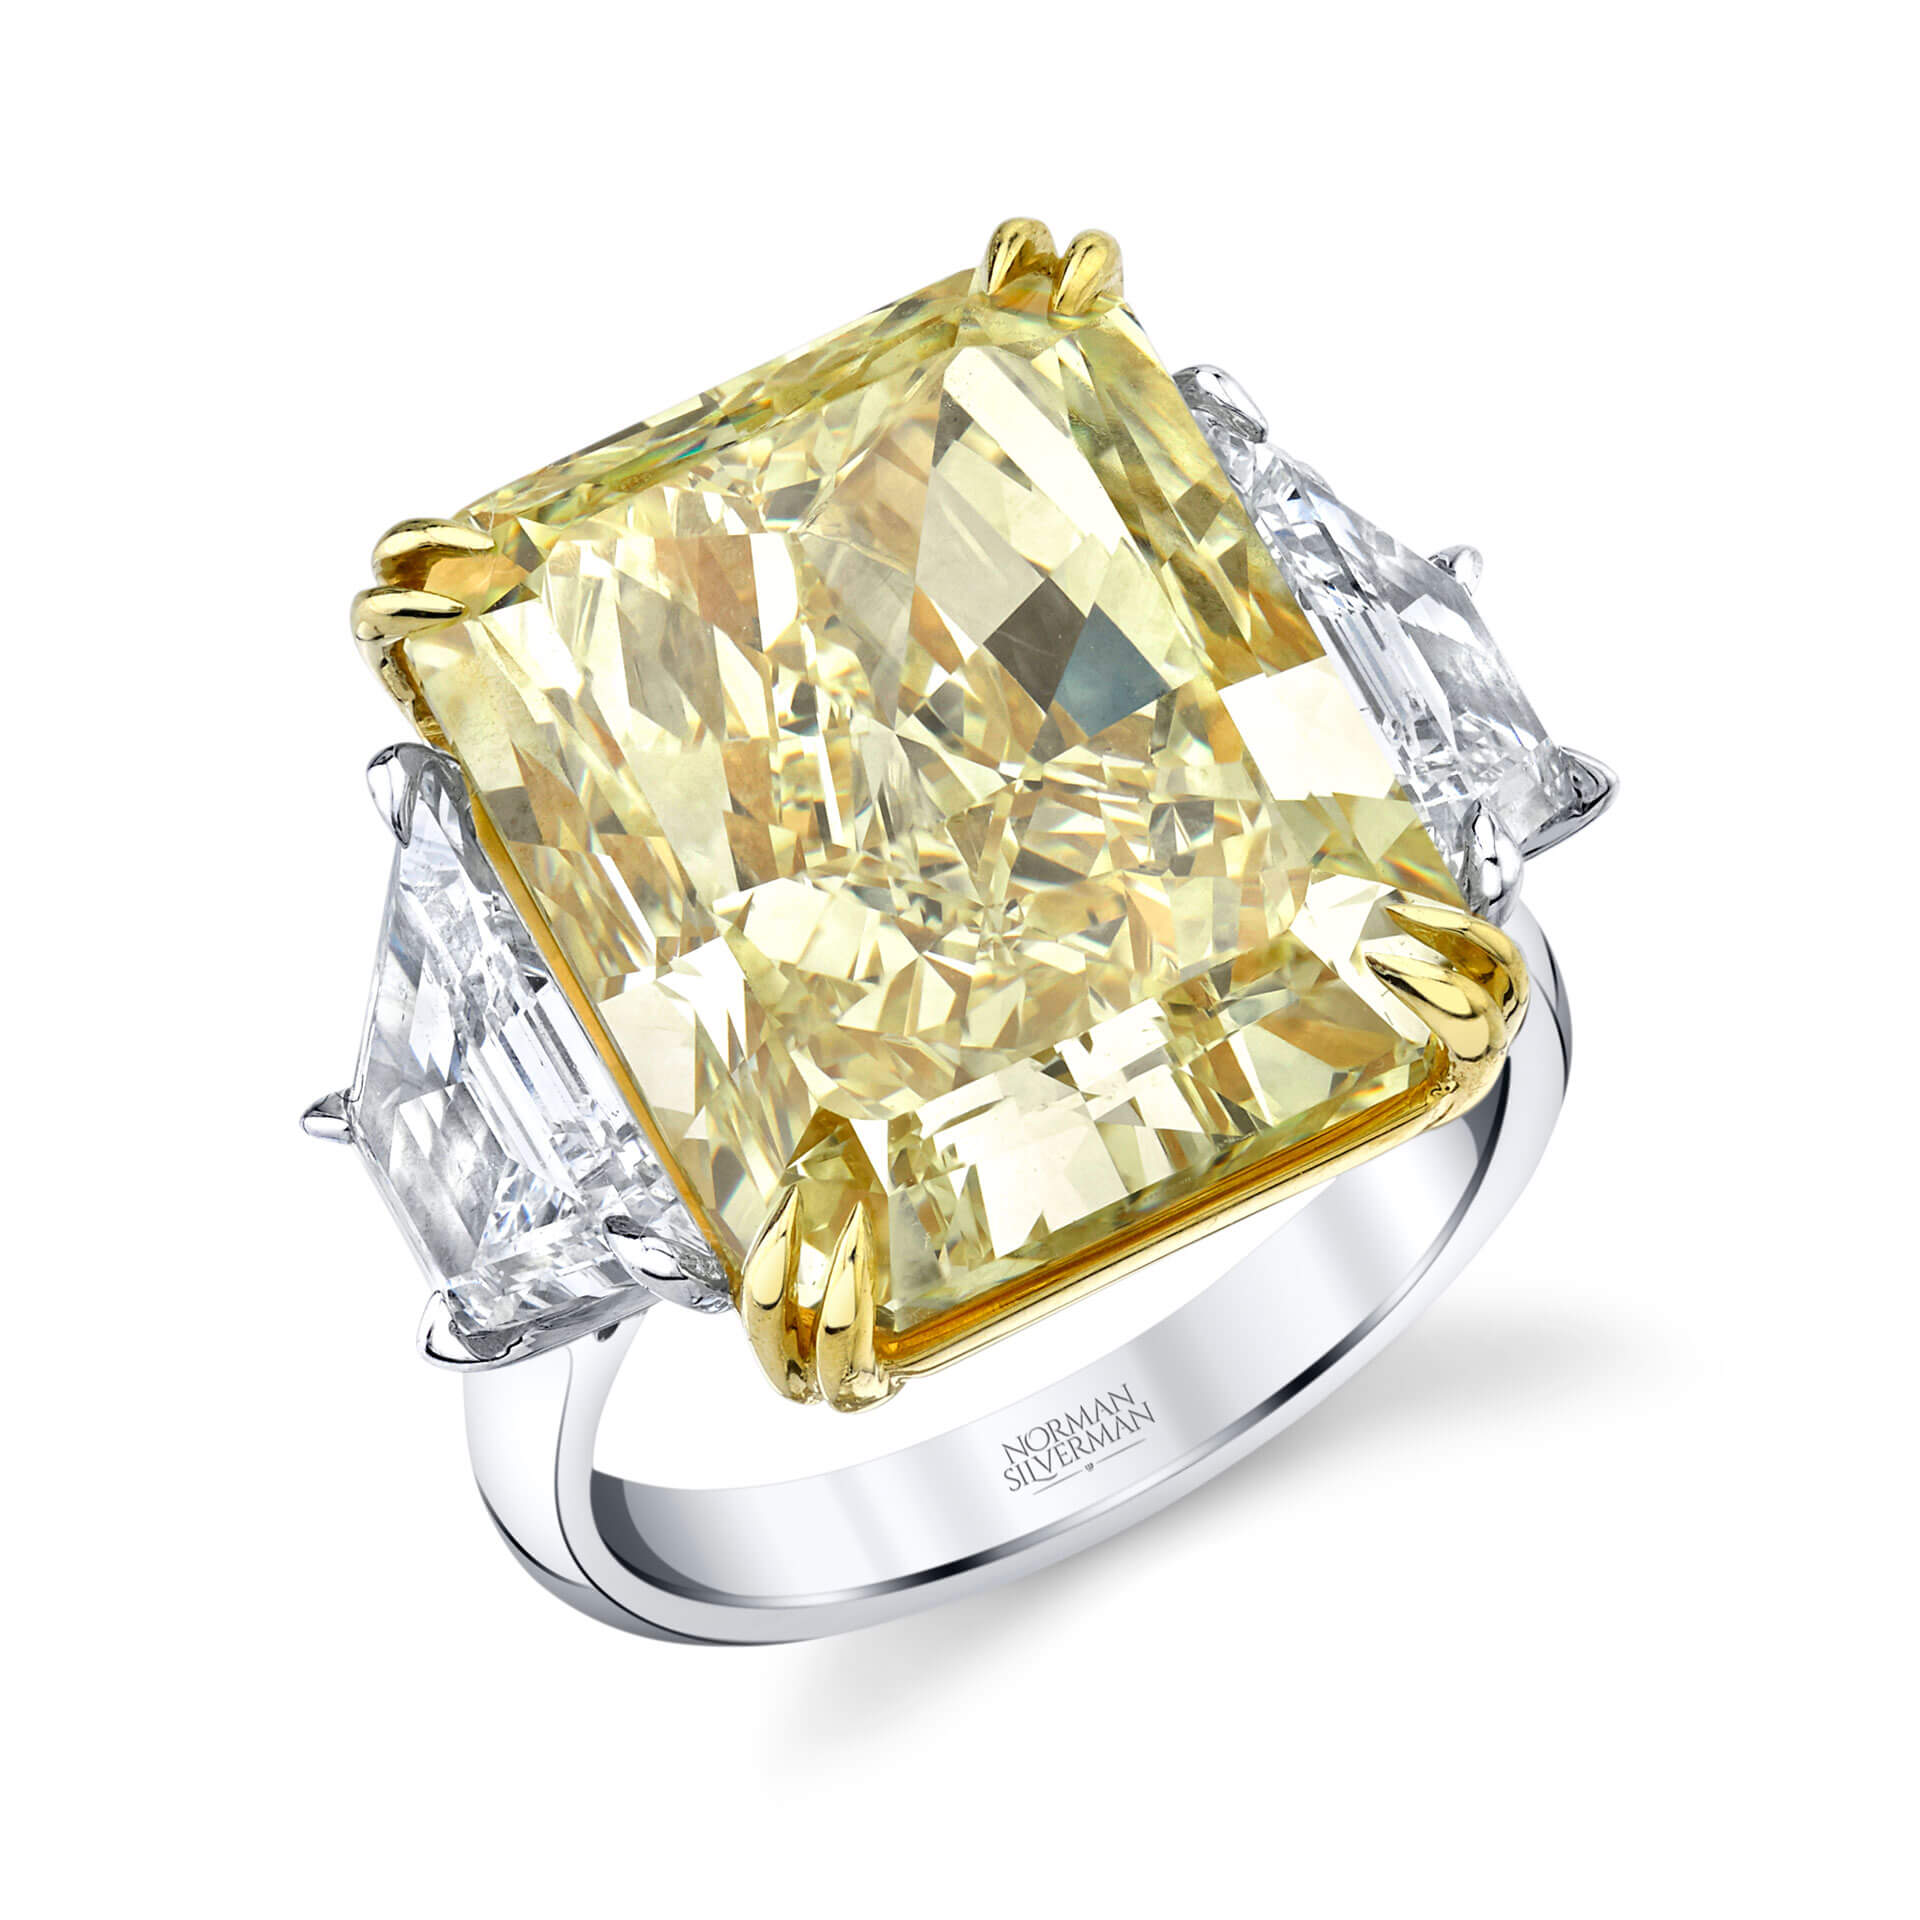 A yellow diamond ring with smaller diamonds on either side and a silver band from Norman Silverman.